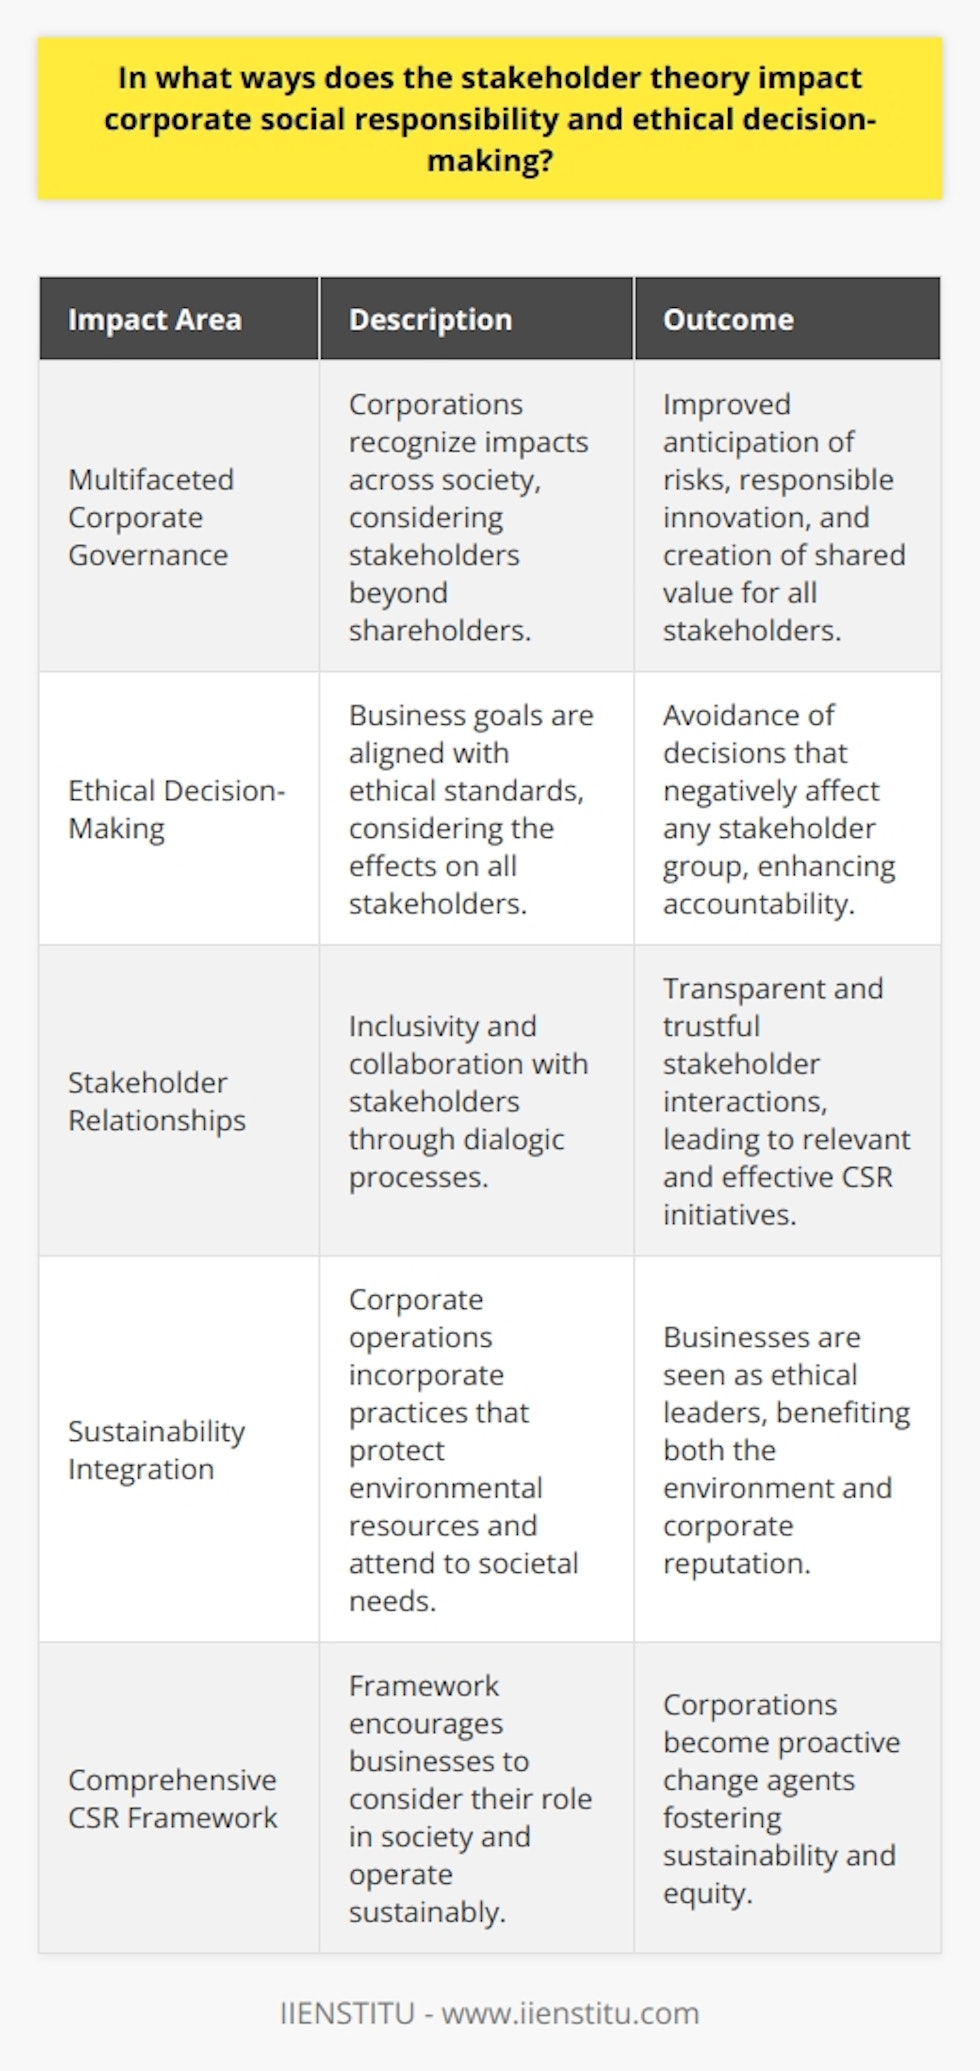 The stakeholder theory has reshaped the landscape of corporate social responsibility (CSR) and ethical decision-making within the world of business. This transformative theory has pushed corporations to rethink their roles within society, obliging them to consider a spectrum of interests rather than focusing solely on maximizing shareholder profits.One of the pivotal impacts of the stakeholder theory on CSR is the induction of multifaceted perspectives into corporate governance. It has compelled companies to recognize that their operations have broad implications across various segments of society, from the well-being of employees and the health of the environment to the development of the communities in which they operate. By integrating stakeholder considerations into corporate strategies, companies can better anticipate risks, innovate responsibly, and create shared value for all parties concerned.The emphasis on ethical decision-making is another significant influence of stakeholder theory. Companies are increasingly held accountable not just for what they achieve but how they achieve it – aligning business goals with ethical standards. Ethical decision-making under this theory involves a scrupulous evaluation of the impact of corporate actions on all stakeholders and seeks to avoid decisions that would detrimentally affect any one group unduly.Moreover, businesses are witnessing a transformation in their relationships with stakeholders, characterized by greater inclusivity and collaboration. The dialogic process encouraged by the stakeholder theory strengthens the bond between corporations and their stakeholders, leading to more transparent and trustful interactions. As a result, companies often find themselves forging CSR initiatives in partnership with stakeholders, ensuring the initiatives resonate with the stakeholders’ needs and expectations while also fulfilling corporate objectives.The stakeholder theory also underpins the integration of sustainability into the core of business operations. It is a driving force behind the adoption of practices that safeguard environmental resources for future generations while also attending to current societal needs. This long-term approach benefits not just the planet and its inhabitants but also the corporations themselves, as they are viewed as leaders in ethical business practices, thus bolstering their reputations and potentially their bottom lines.In essence, the stakeholder theory provides a comprehensive framework for businesses to engage in CSR and ethical decision-making. Through this lens, corporations can see beyond the immediate allure of profit to the larger, more intricate tapestry of society and environment within which they exist and operate. It encourages businesses to become proactive agents of positive change, fostering a more sustainable and equitable world – objectives that are increasingly not just desired but demanded by stakeholders worldwide.